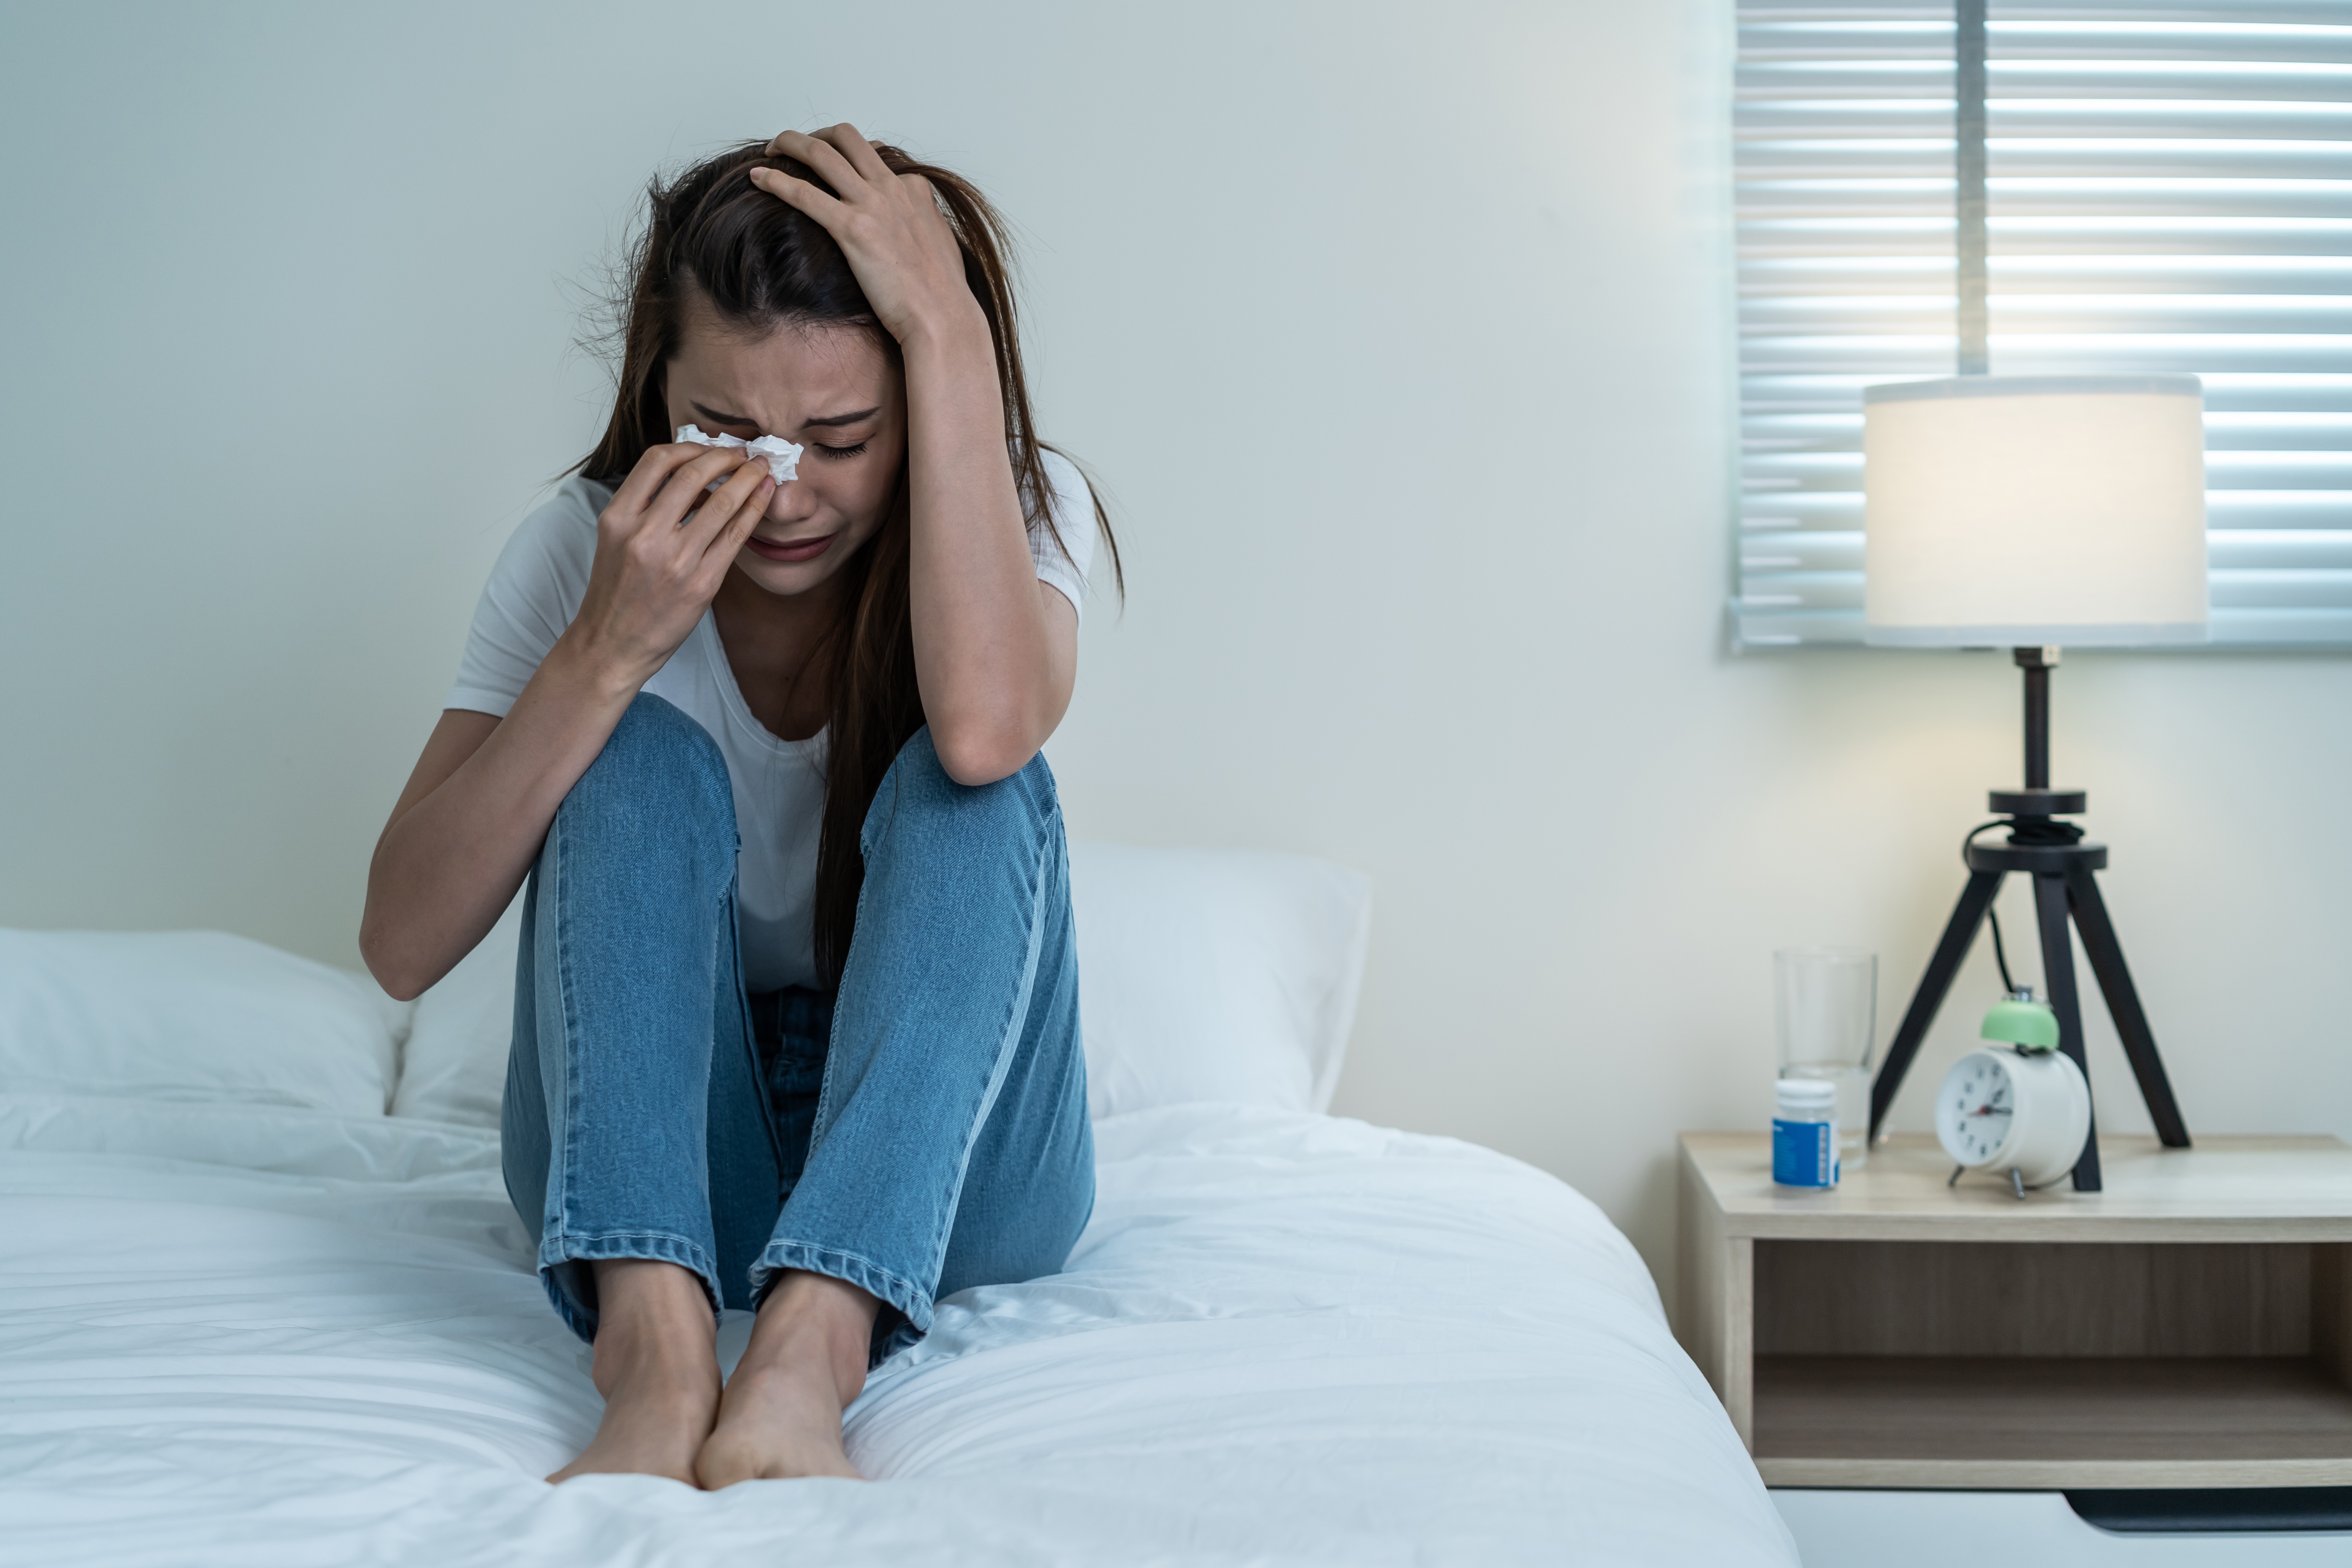 Girl is crying sitting on the bed | Source: Shutterstock.com